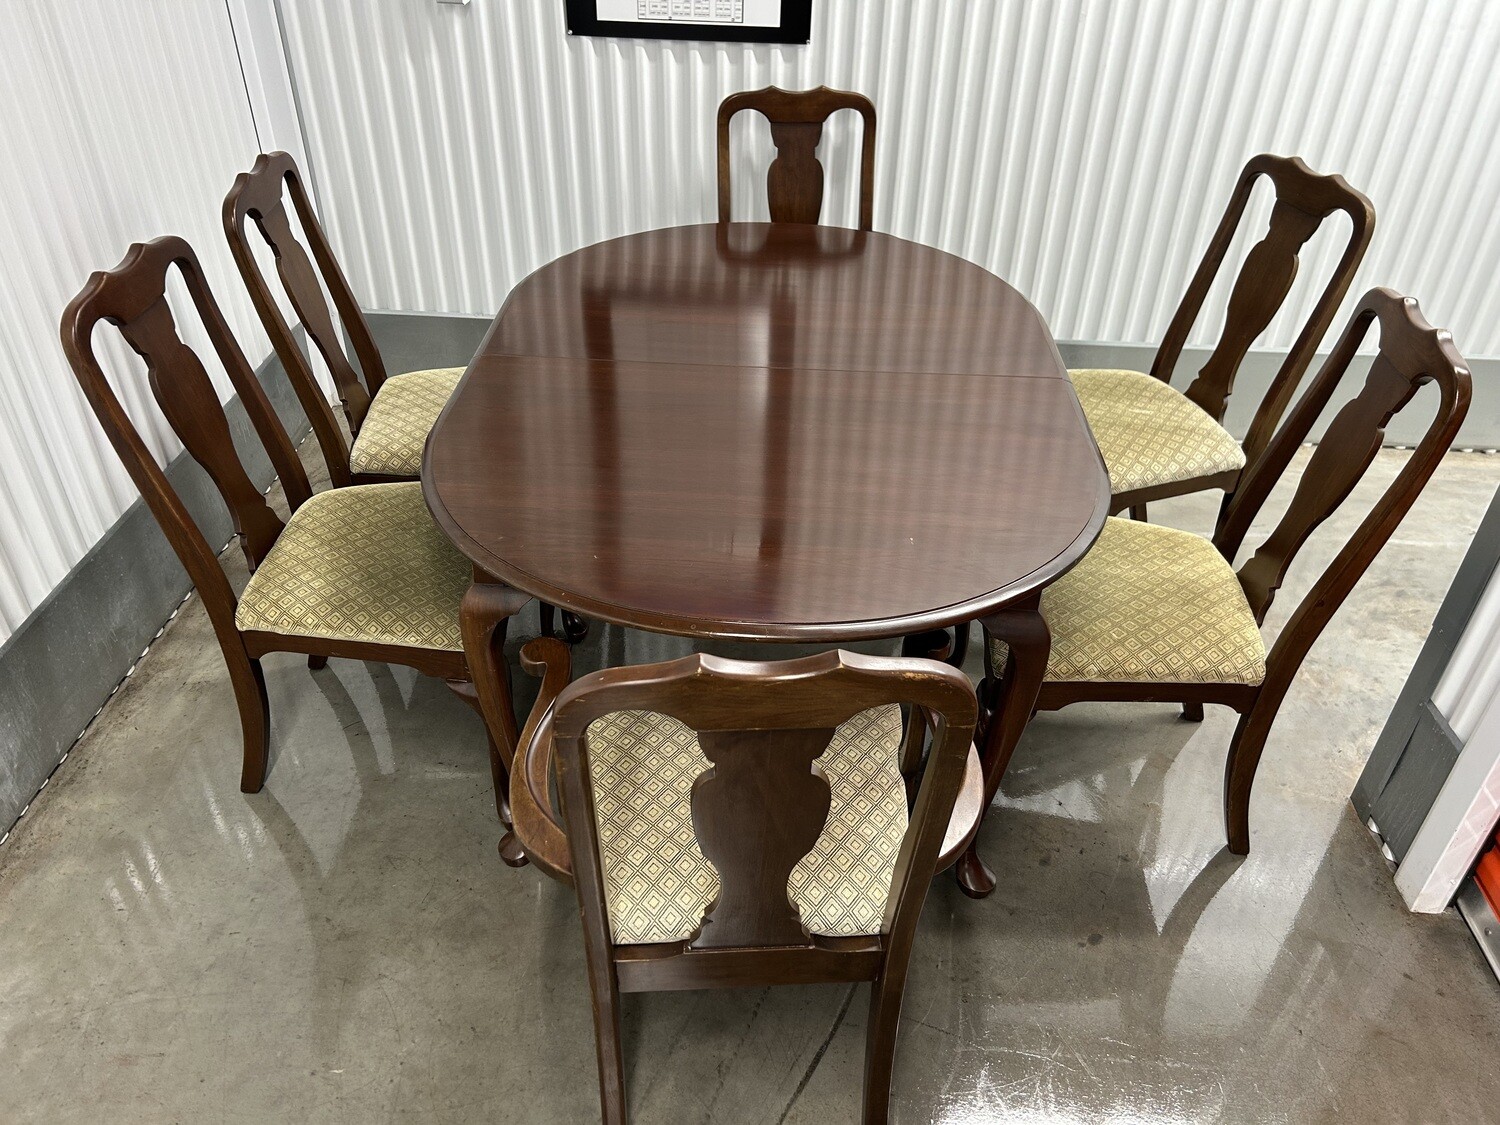 Queen Anne Dining Table, 6 chairs, cherry finish #1048